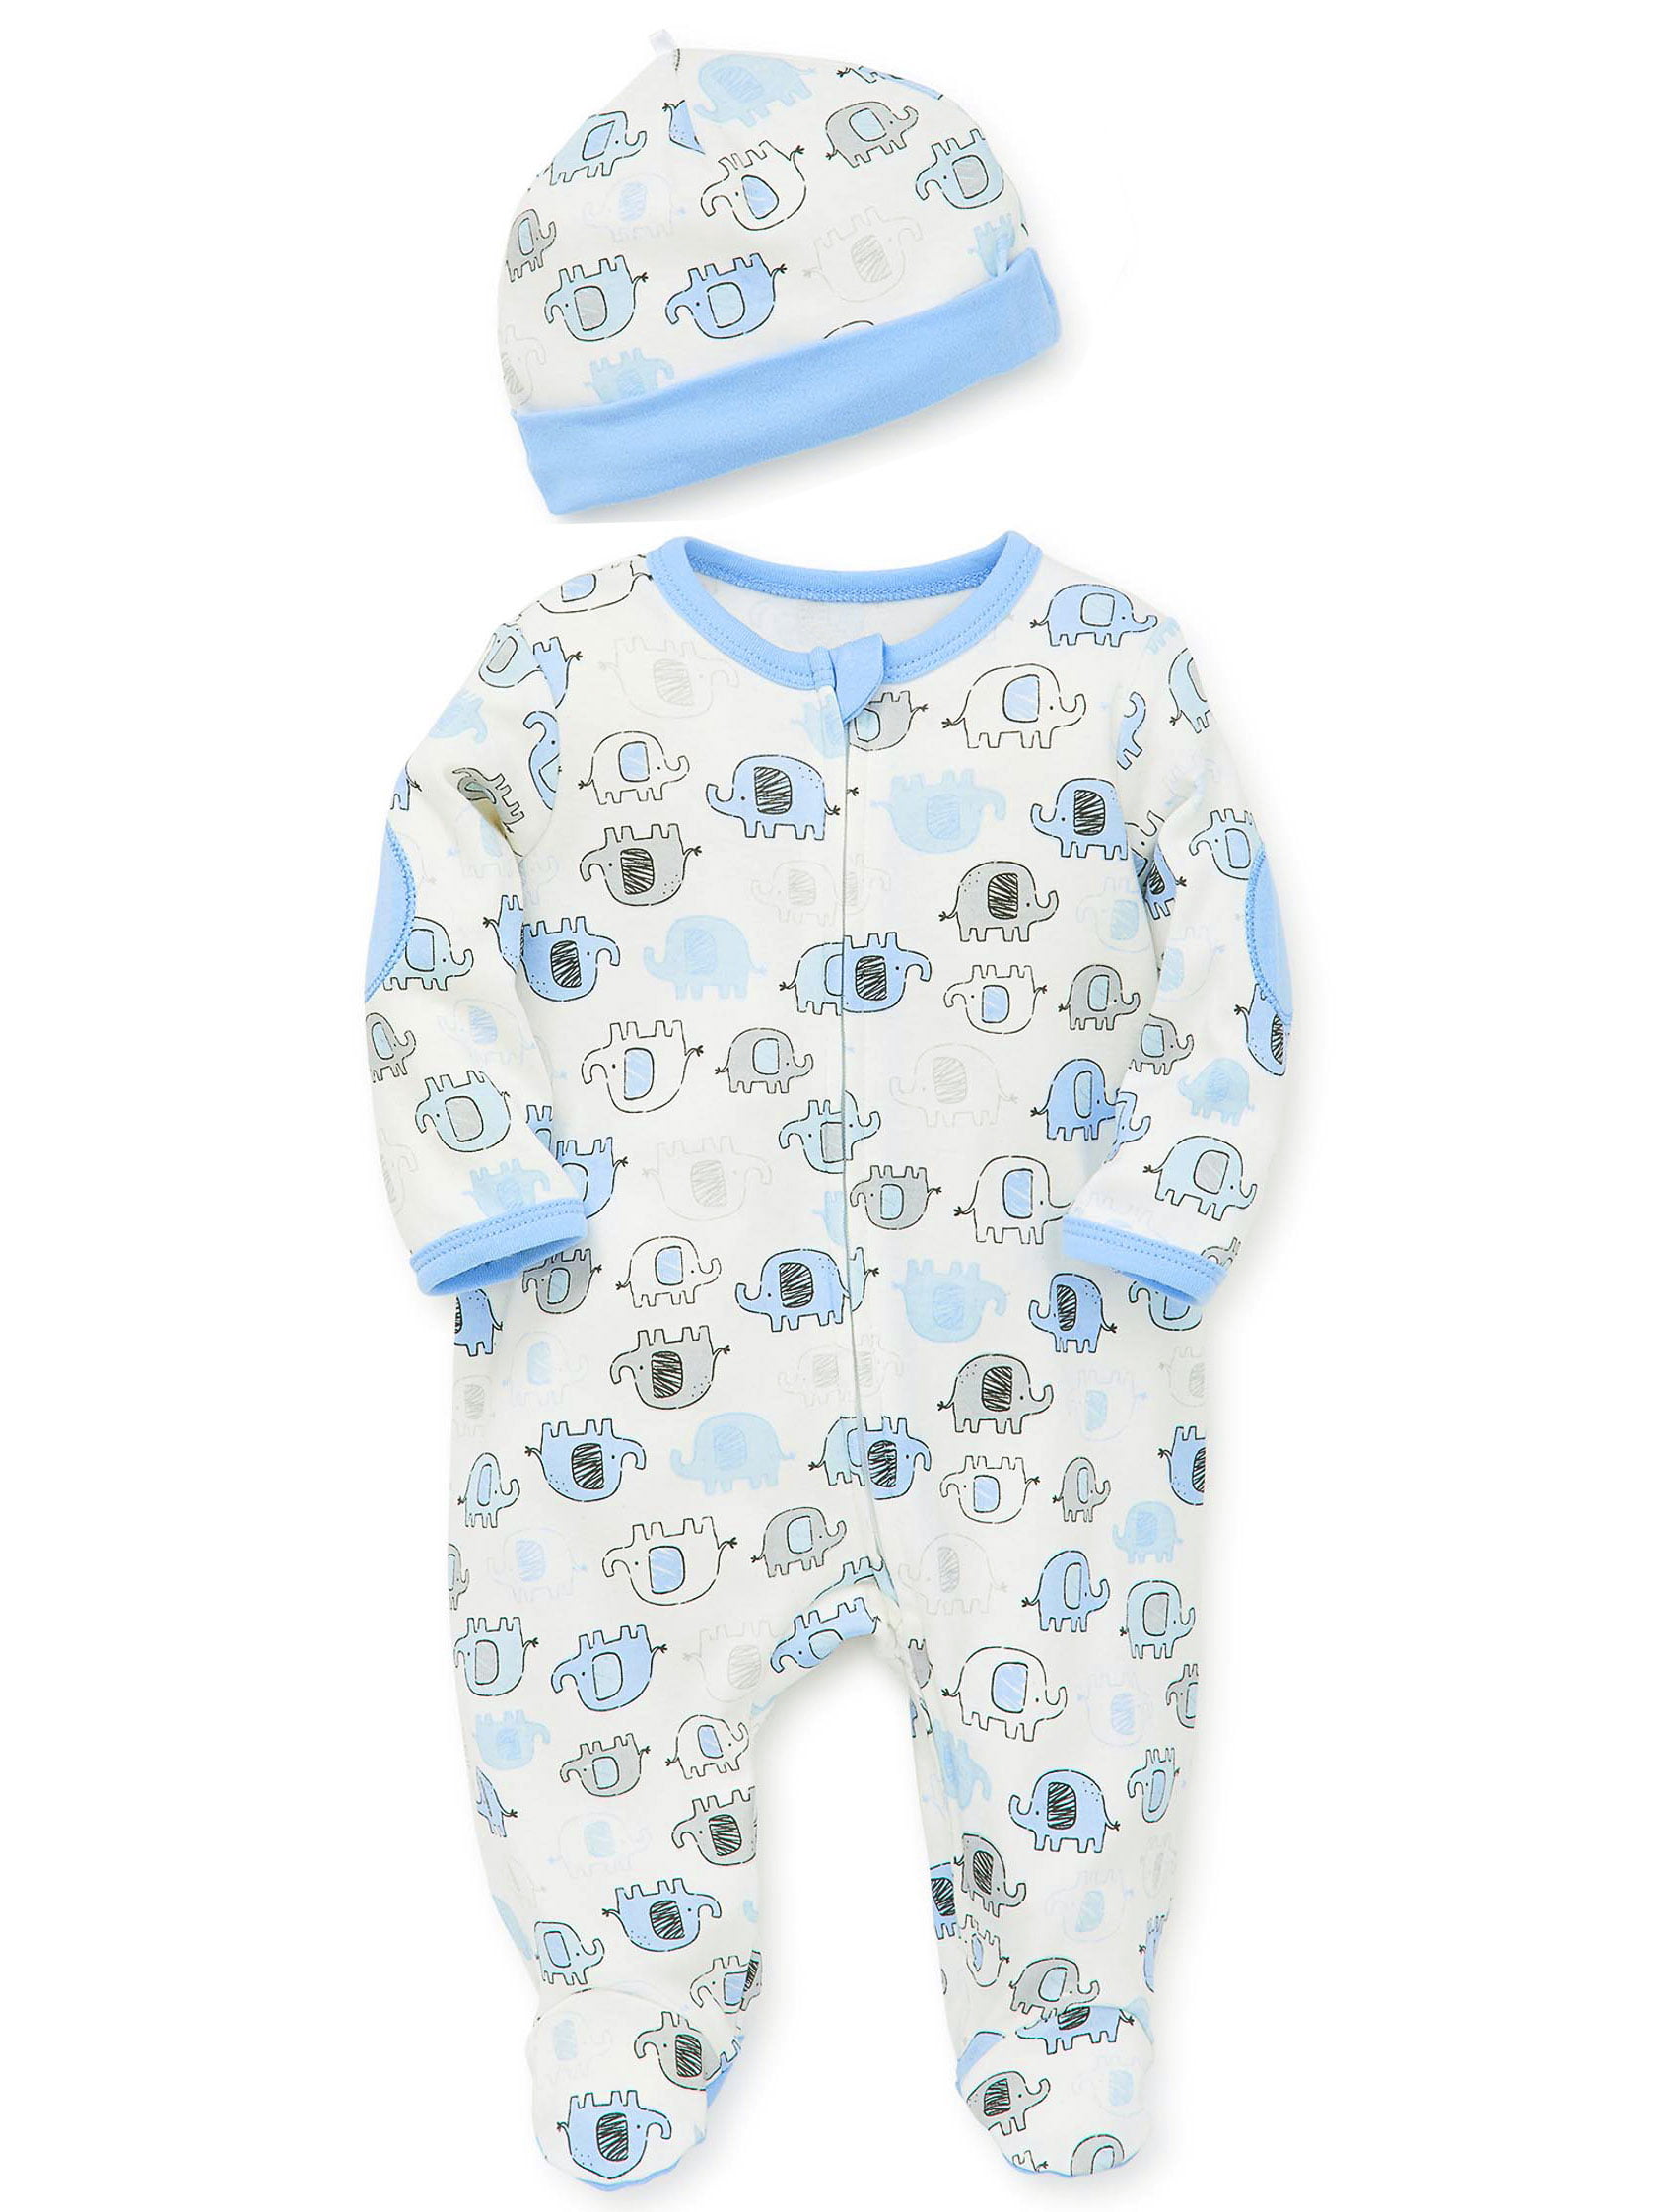 3-6 mo 6-9 mos Details about   Sleepwear Baby Pajamas Footed Pj's Dump Elephants One-piece NB 